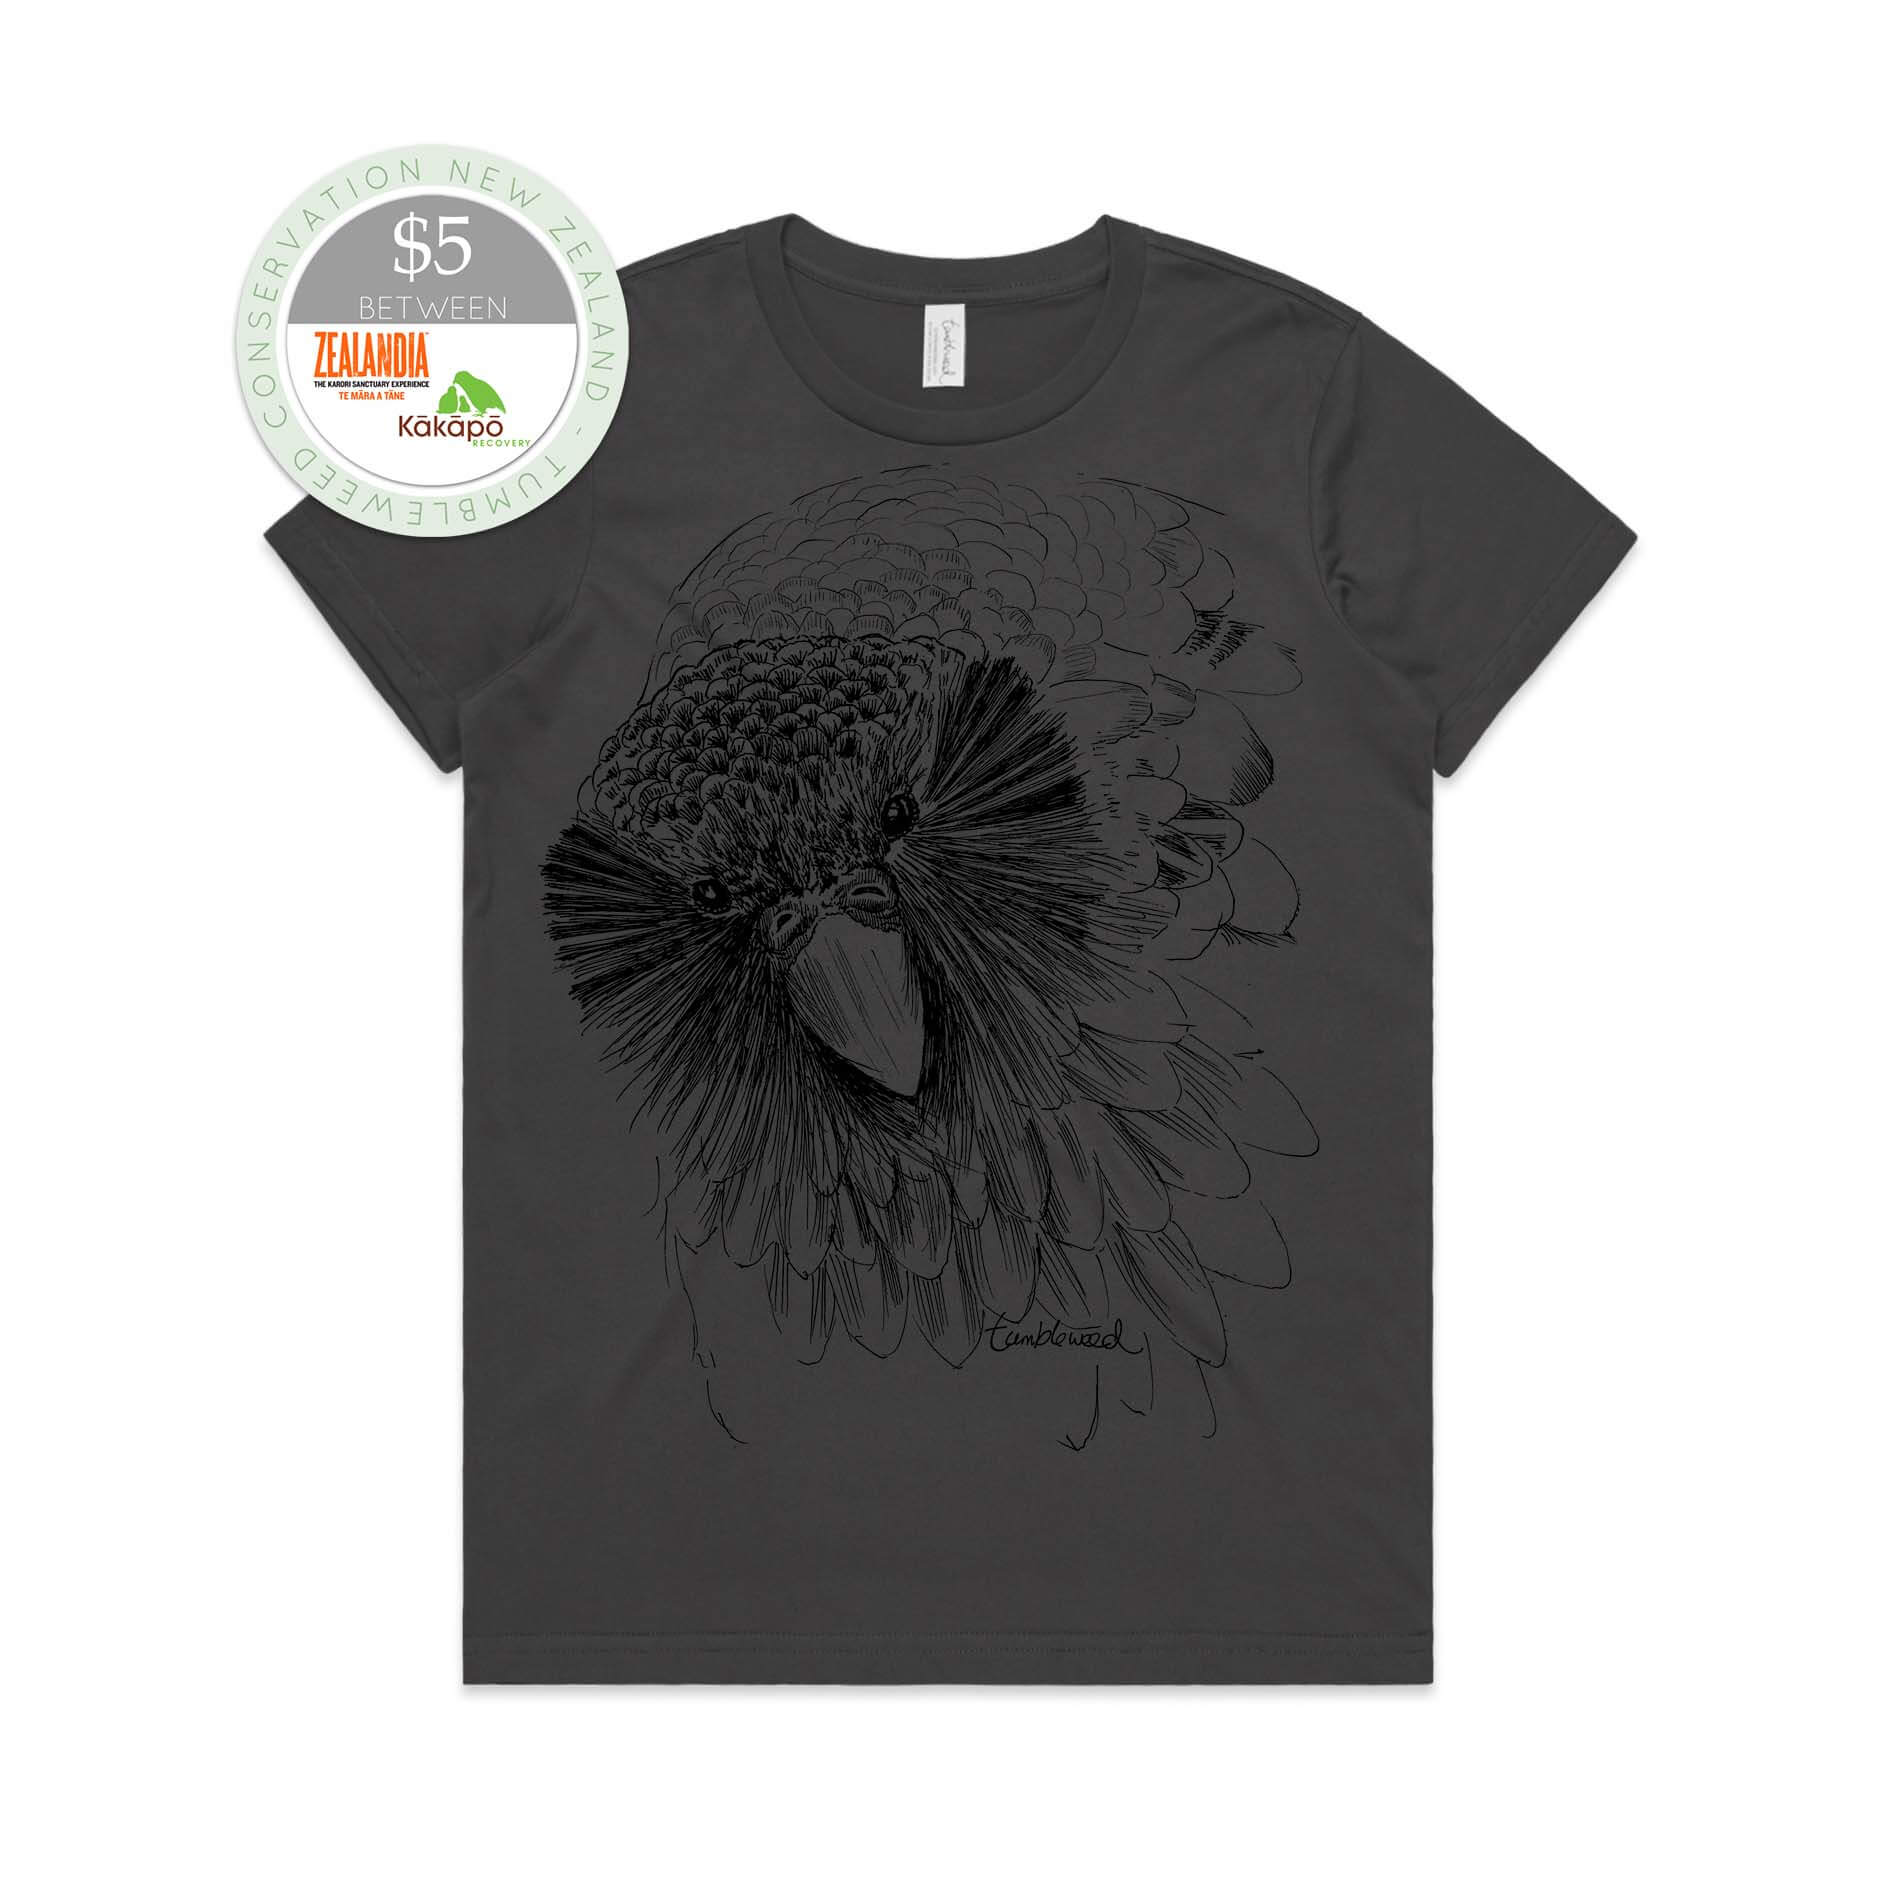 Charcoal, female t-shirt featuring a screen printed Sirocco the Kākāpō design.